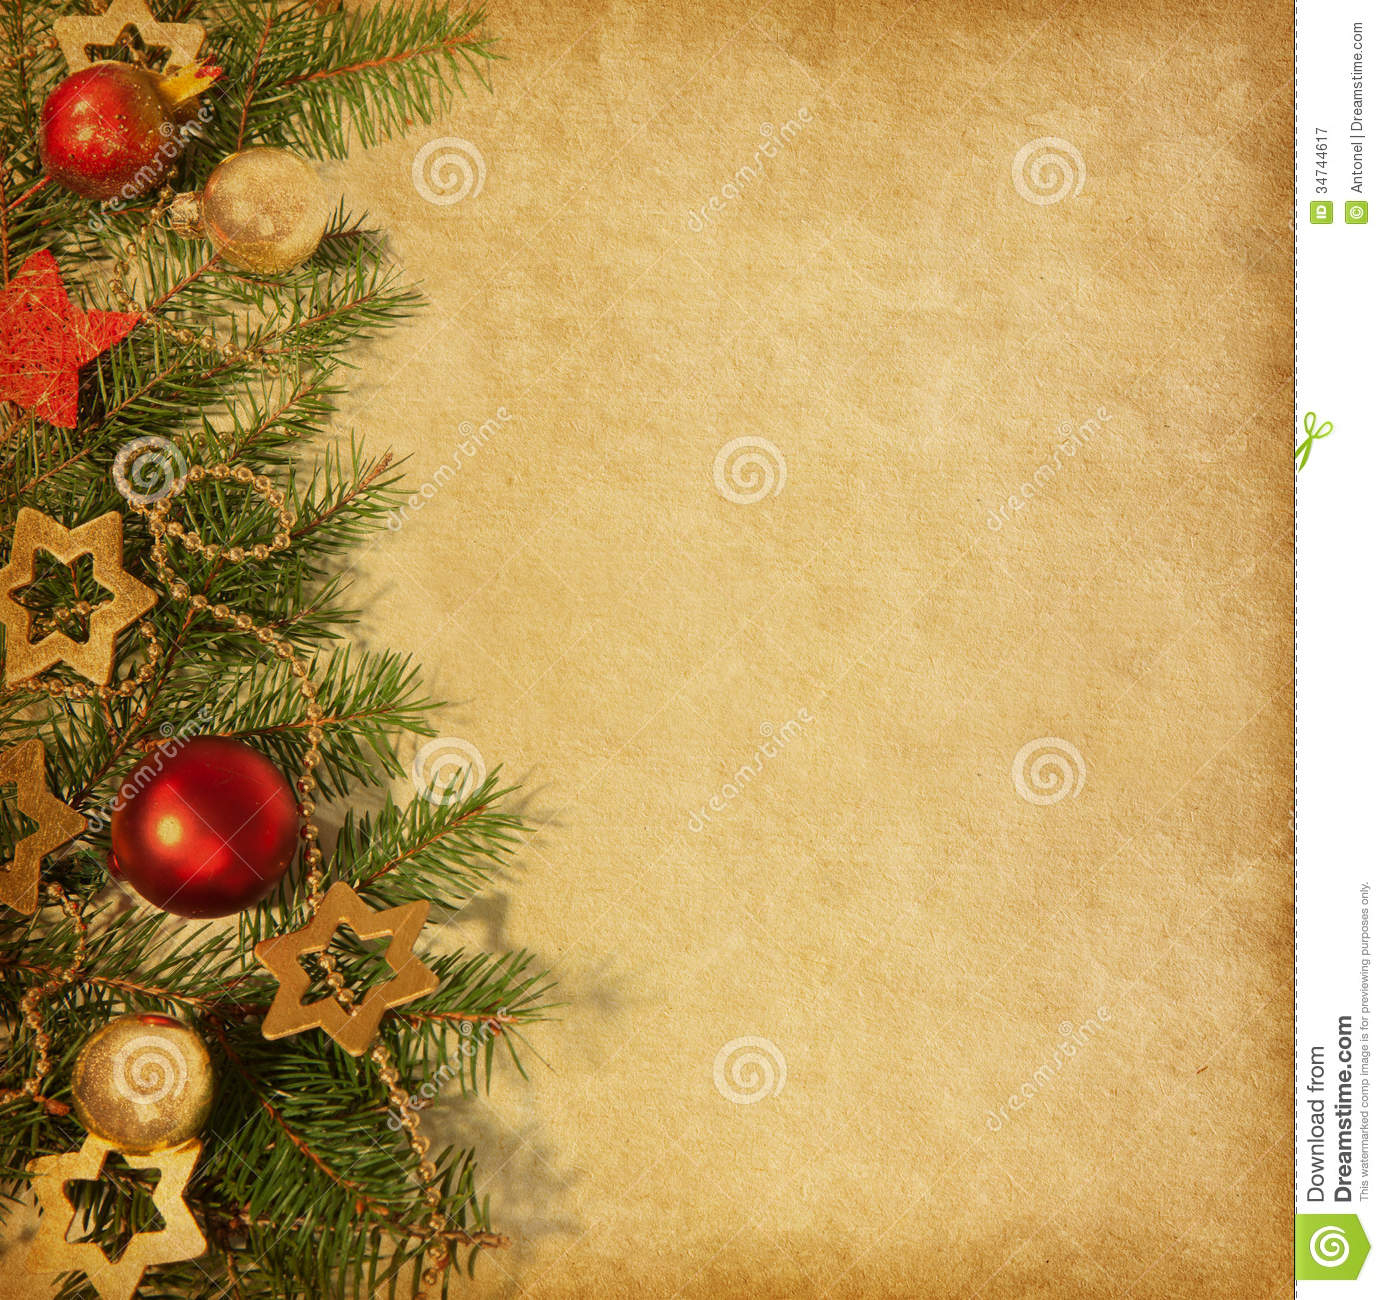 Free Printable Christmas Backgrounds – Happy Holidays! - Free Printable Christmas Backgrounds